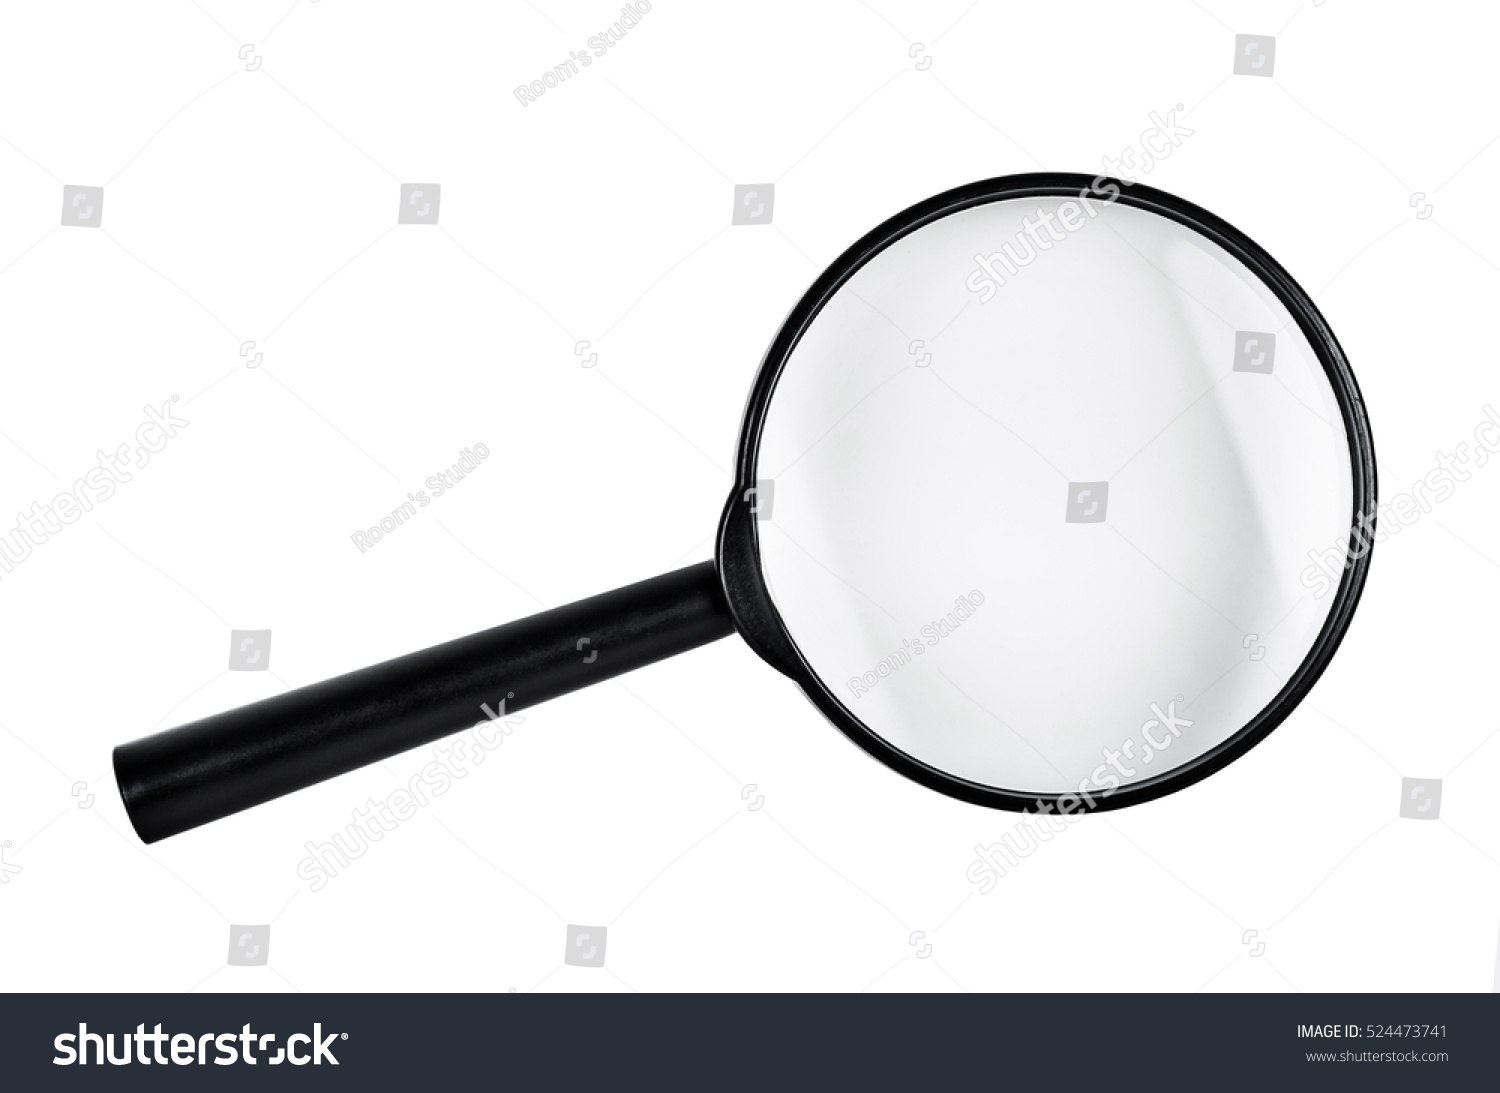 Magnifying glass isolated on white background, Saved Clipping path. #524473741